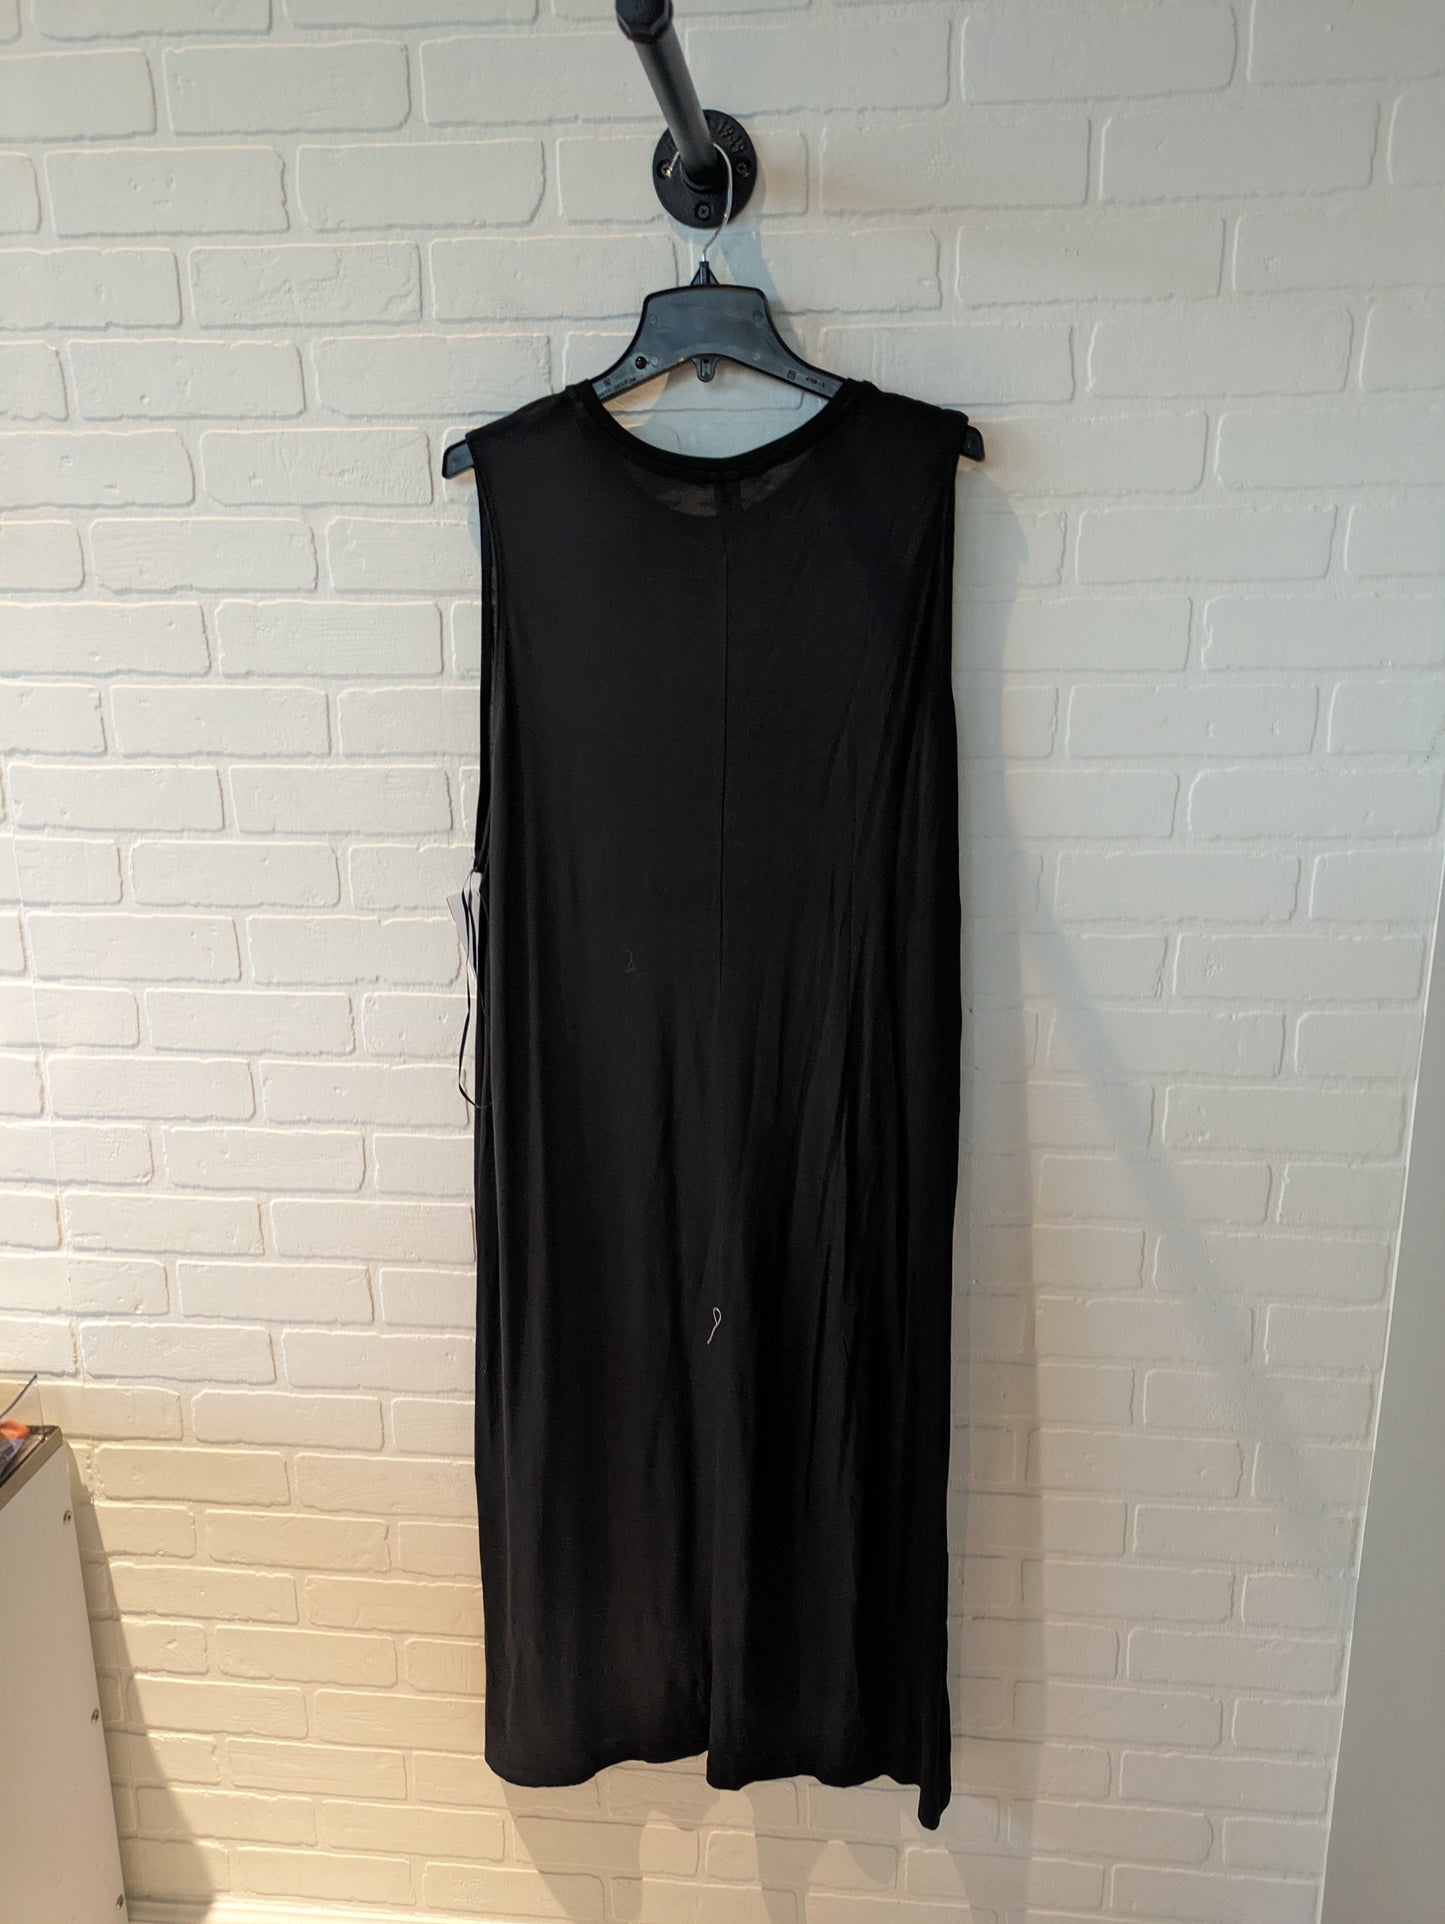 Dress Casual Maxi By H&m  Size: 1x